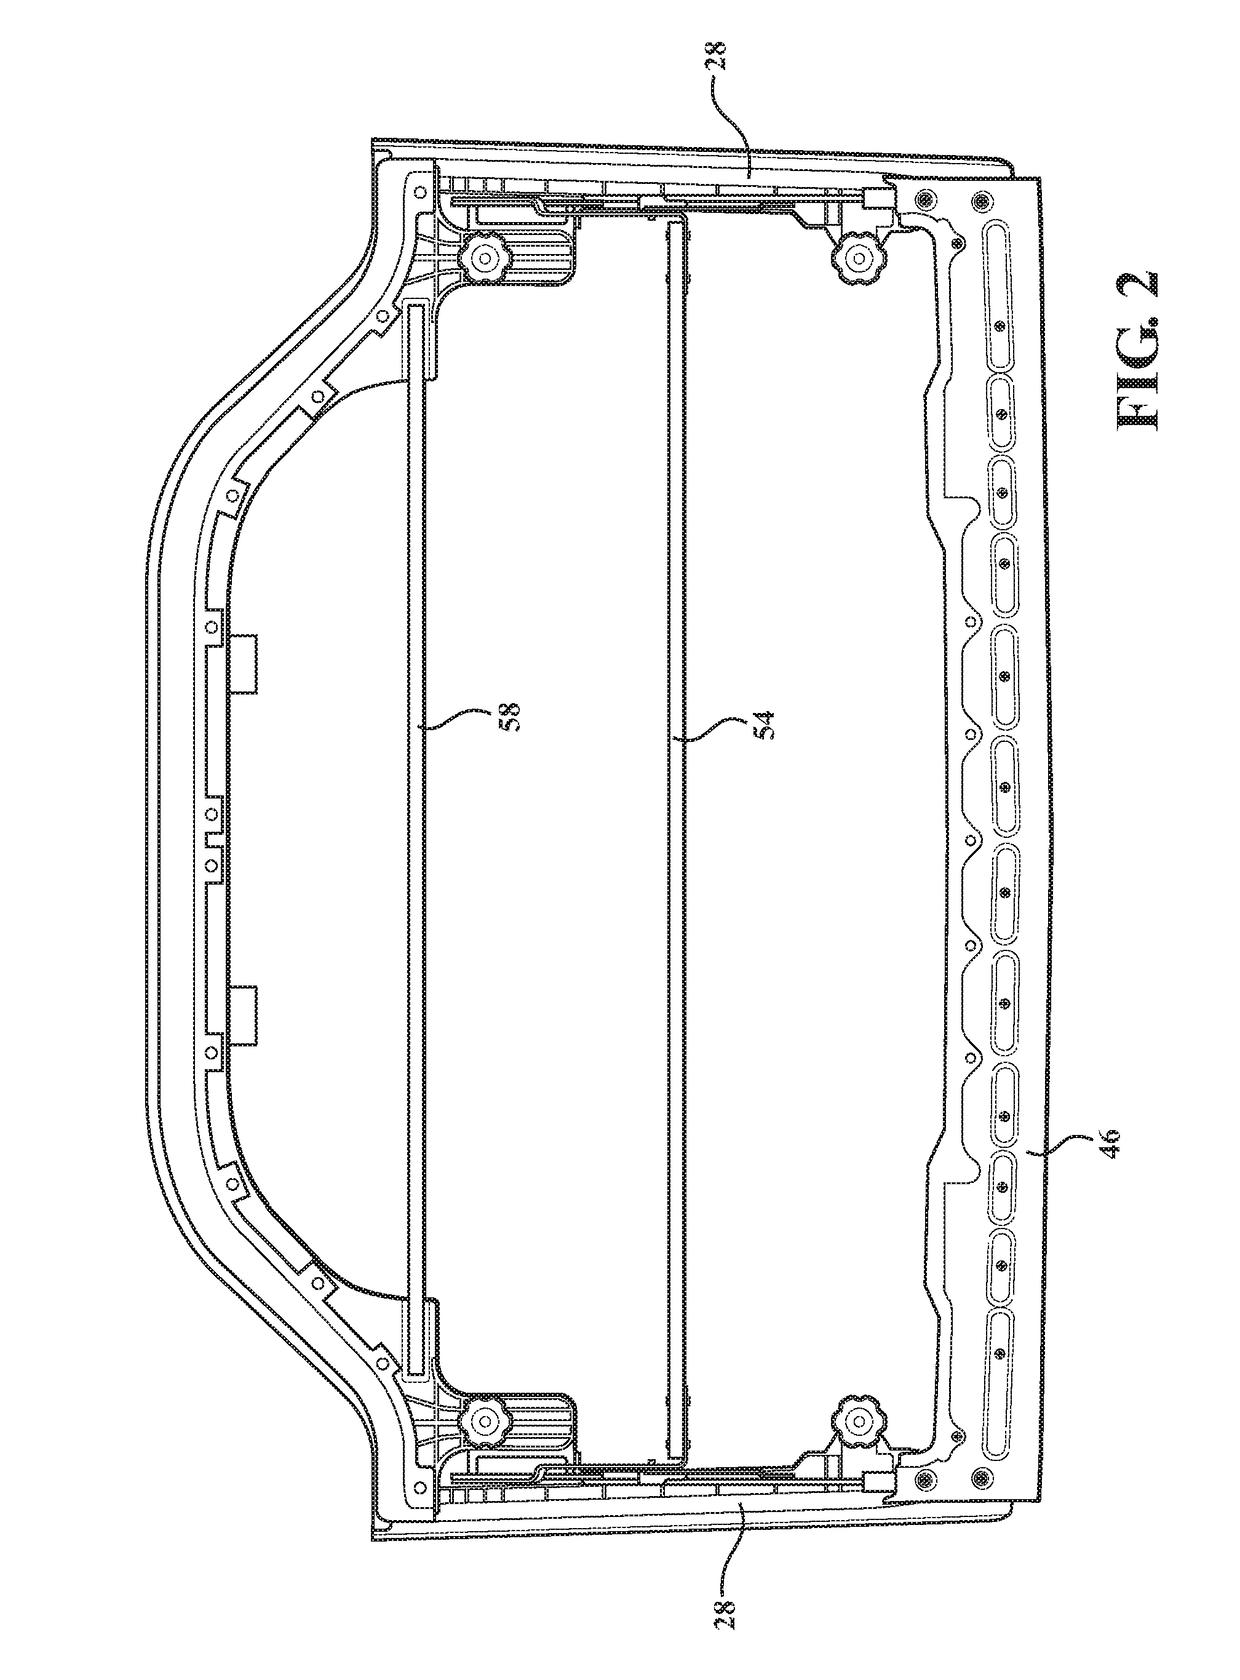 Front top assembly for suv